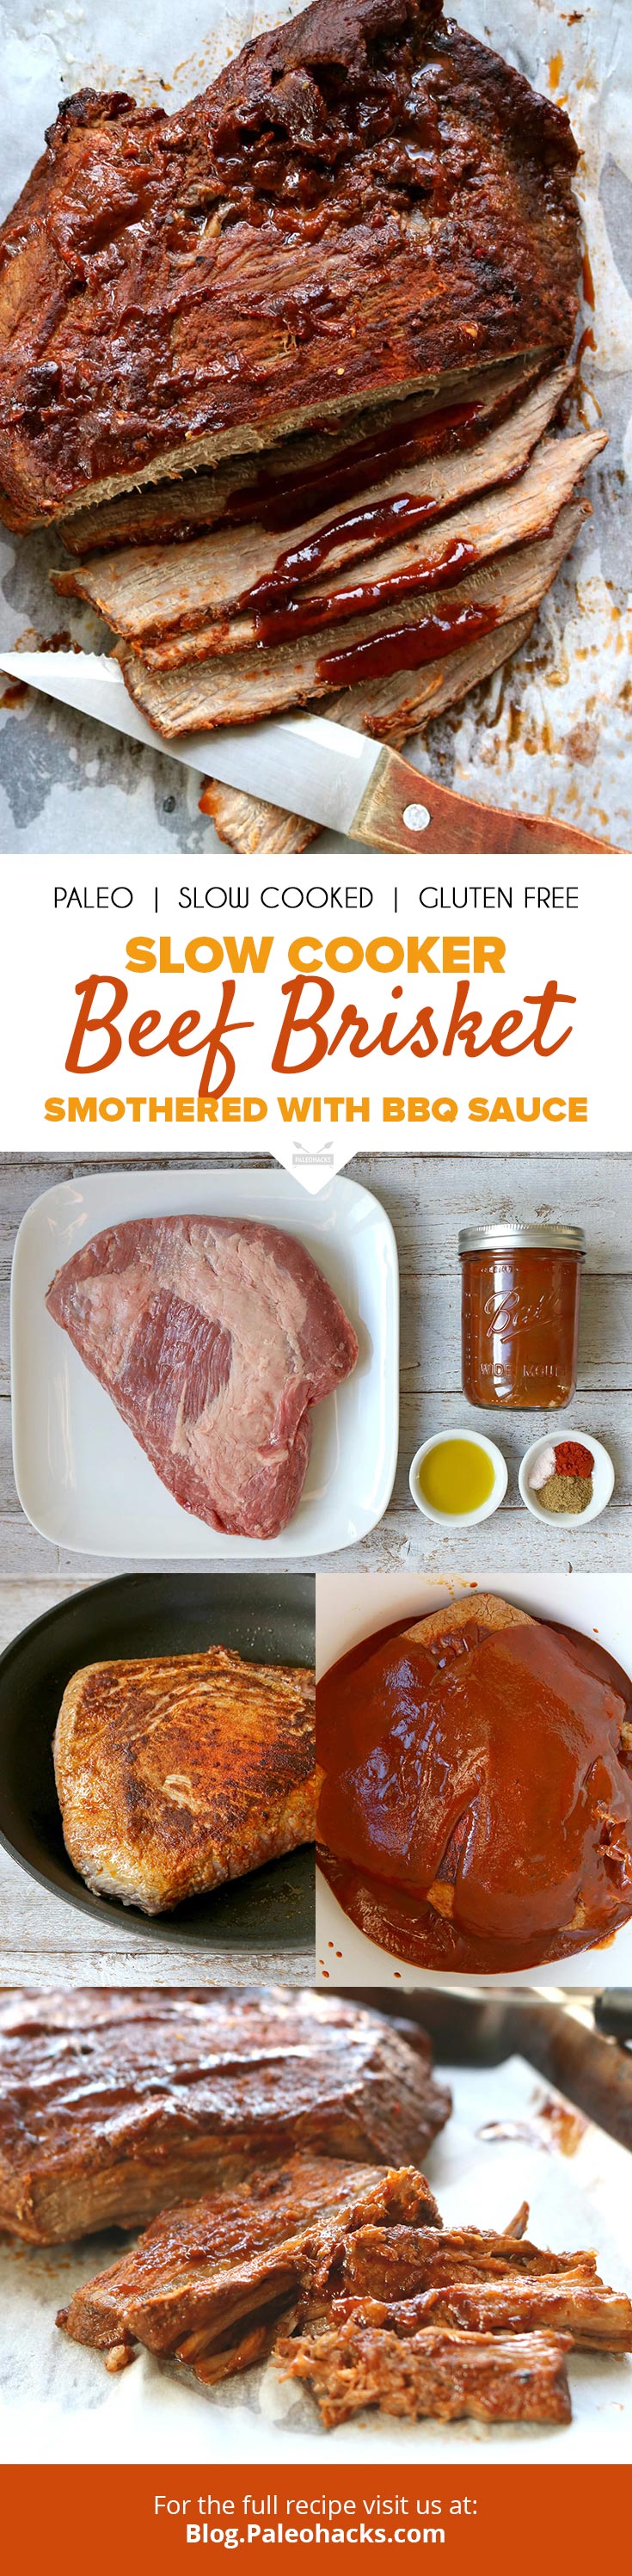 Enjoy barbecue flavor year round with this juicy slow cooker beef brisket smothered in BBQ sauce.